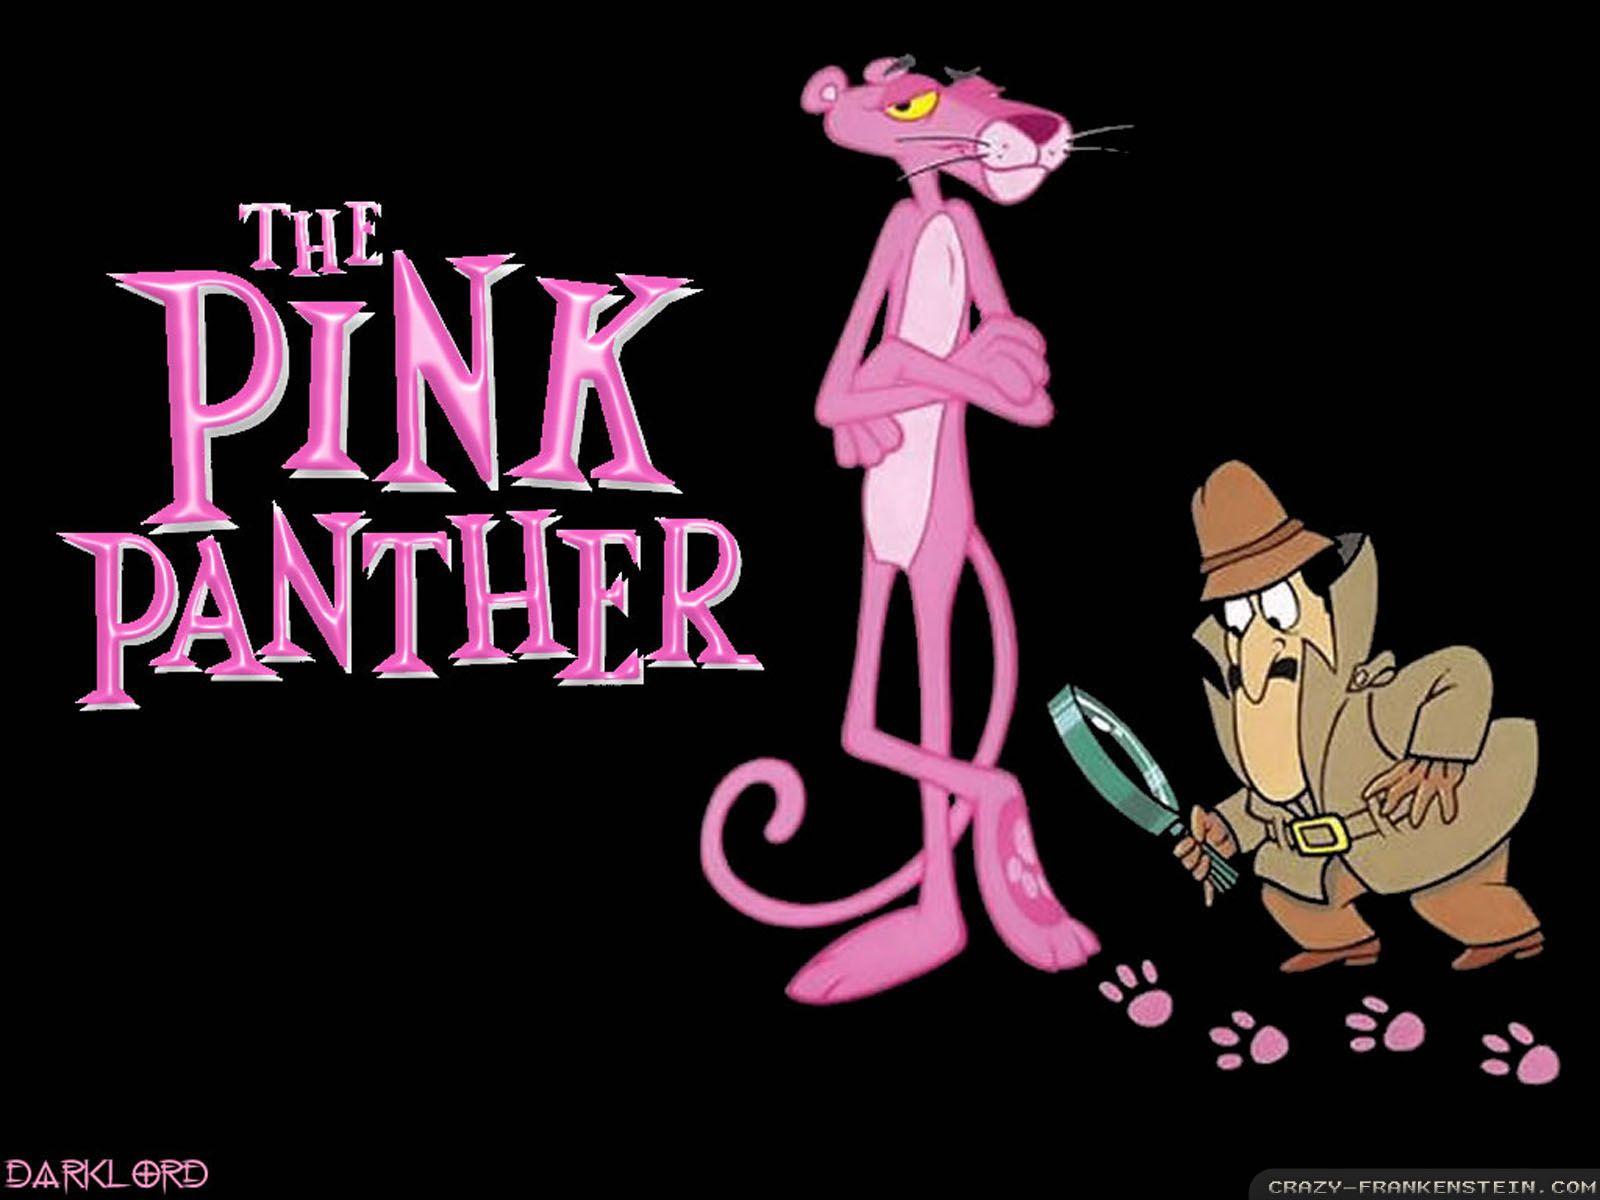 The Pink Panther Theme Song. Movie Theme Songs & TV Soundtracks